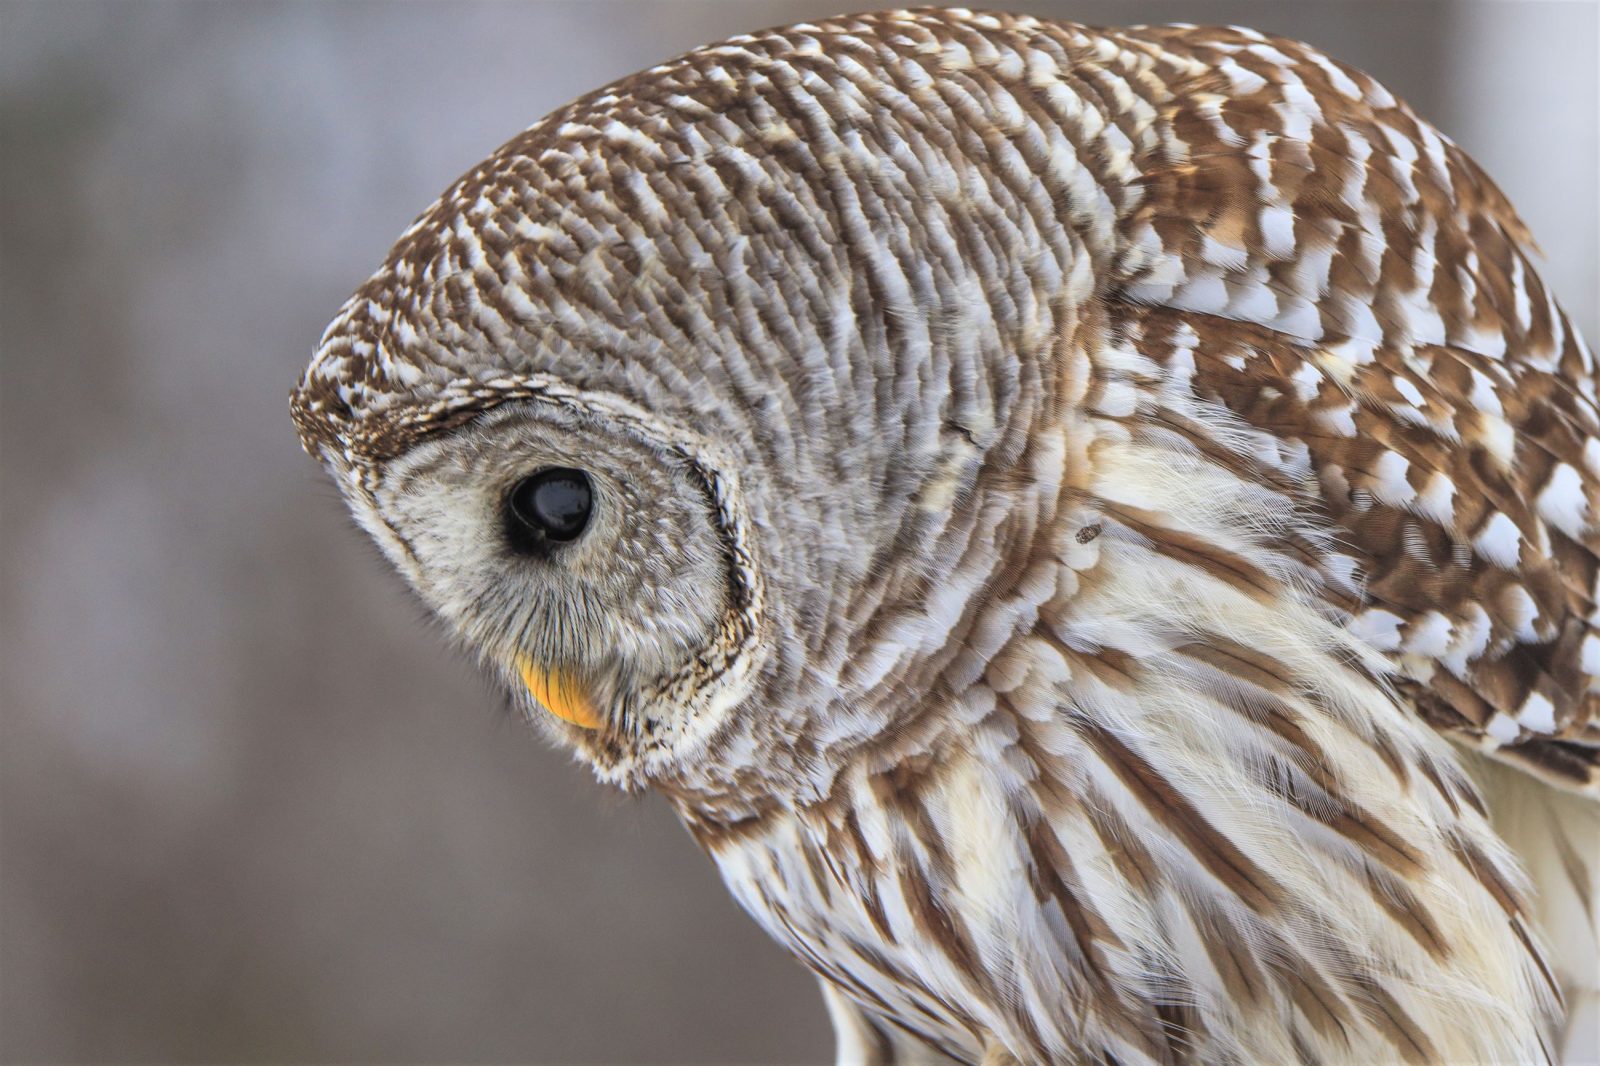 Photo of an owl that was entered in the 2022 Maple Grove photography contest